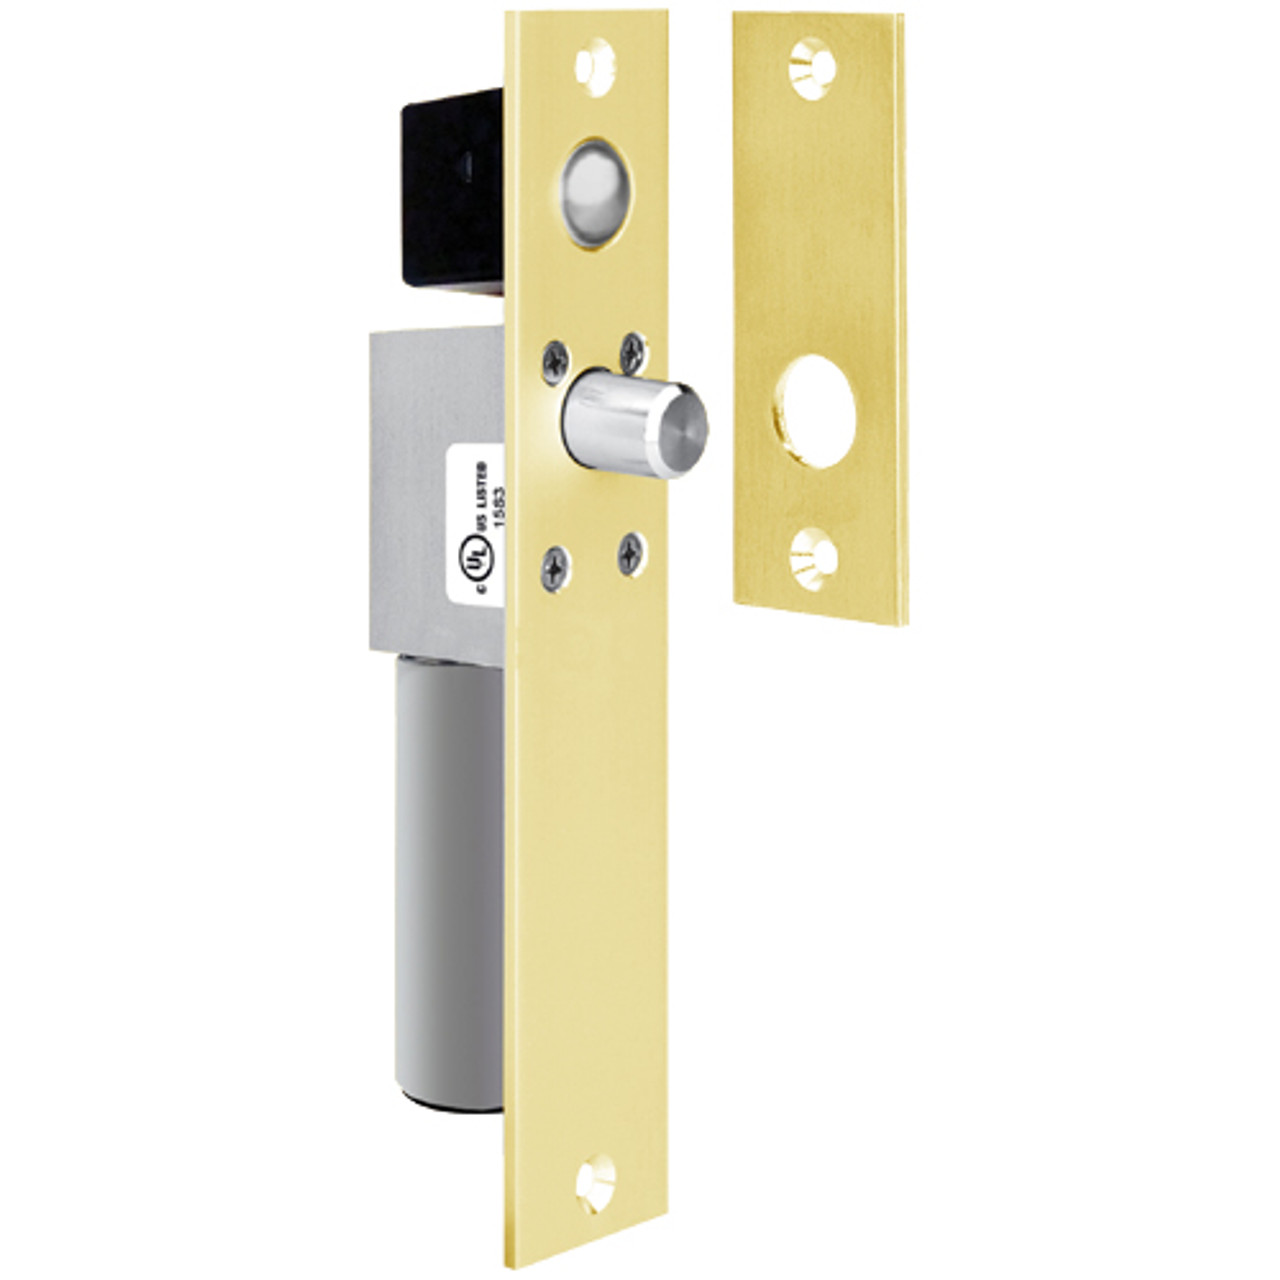 1490AIC SDC Fits 1-1/2 inche Frame Non UL FailSafe Spacesaver Mortise Bolt Lock in Bright Brass